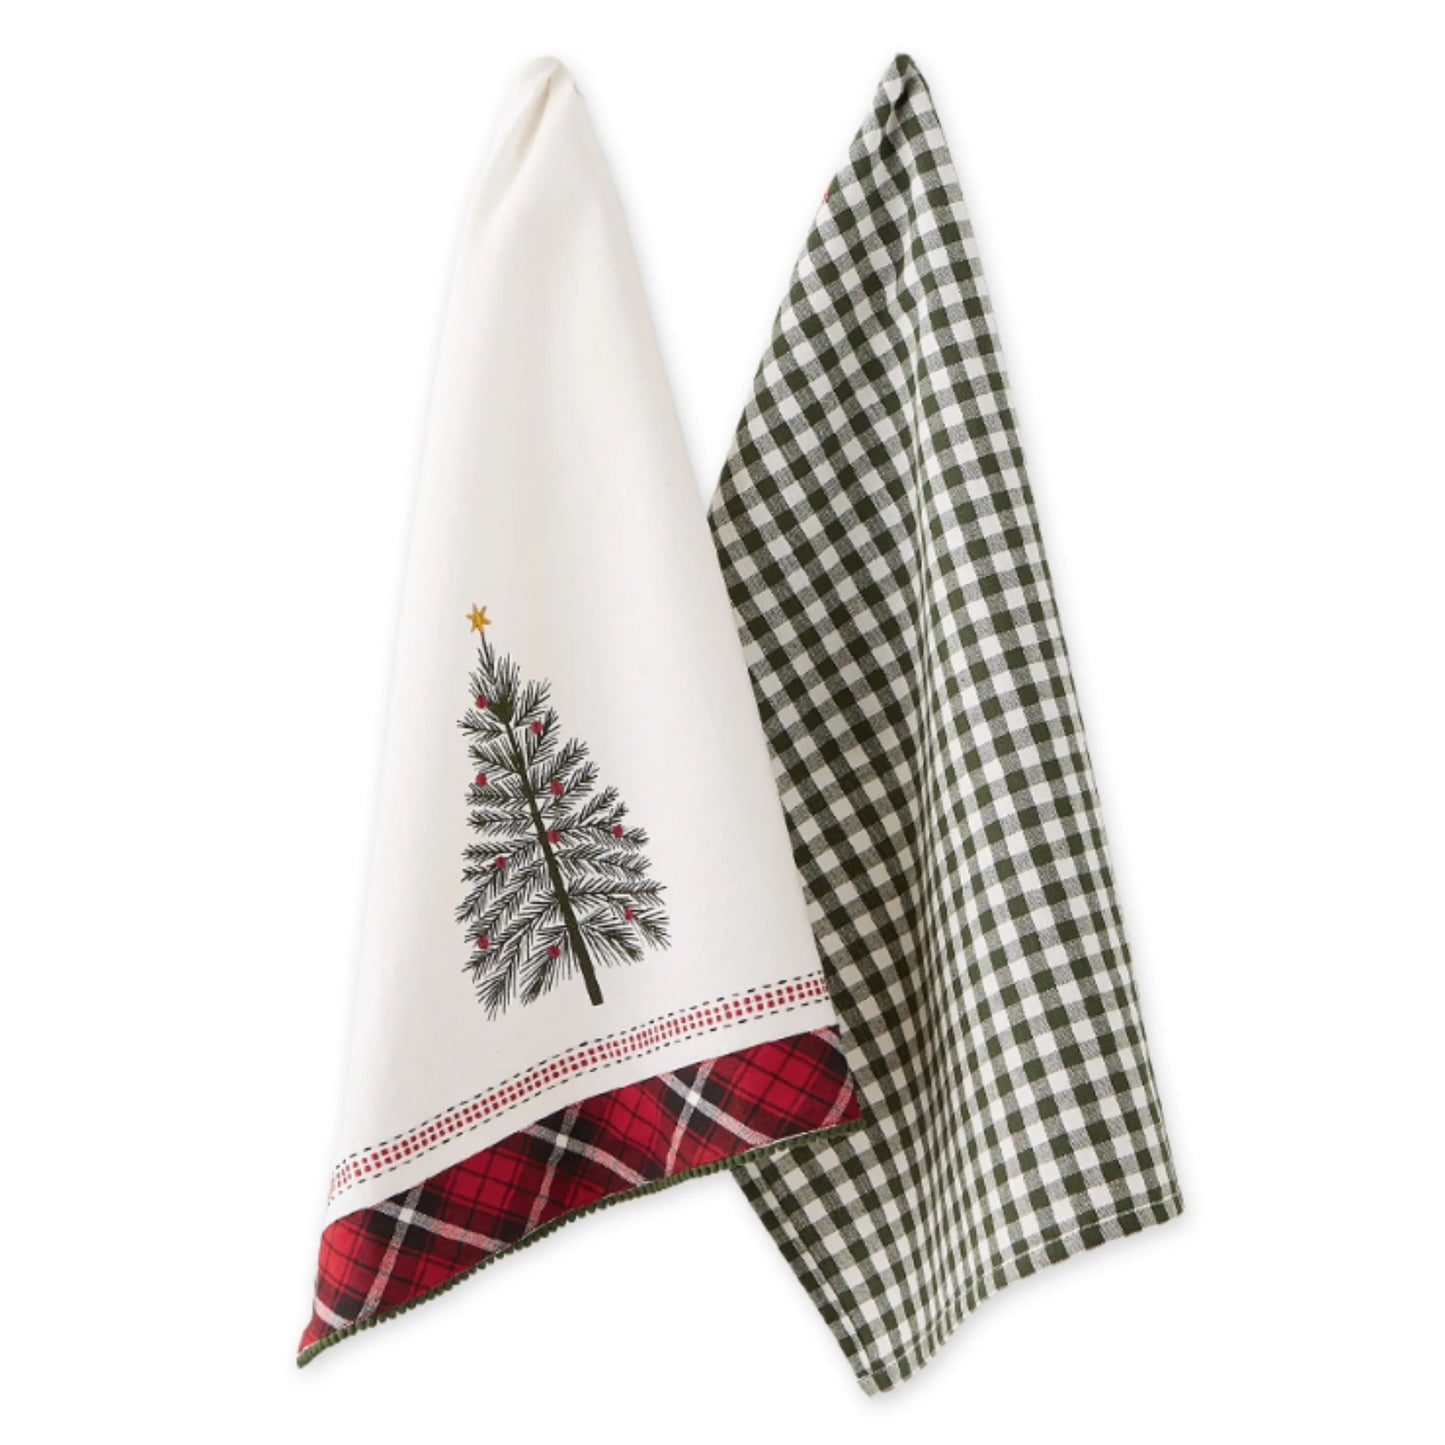 O Tannenbaum Christmas Tabletop Kitchen Collection Dishtowel Towel Gift Set of 2 18x28 L Holiday Print Towels